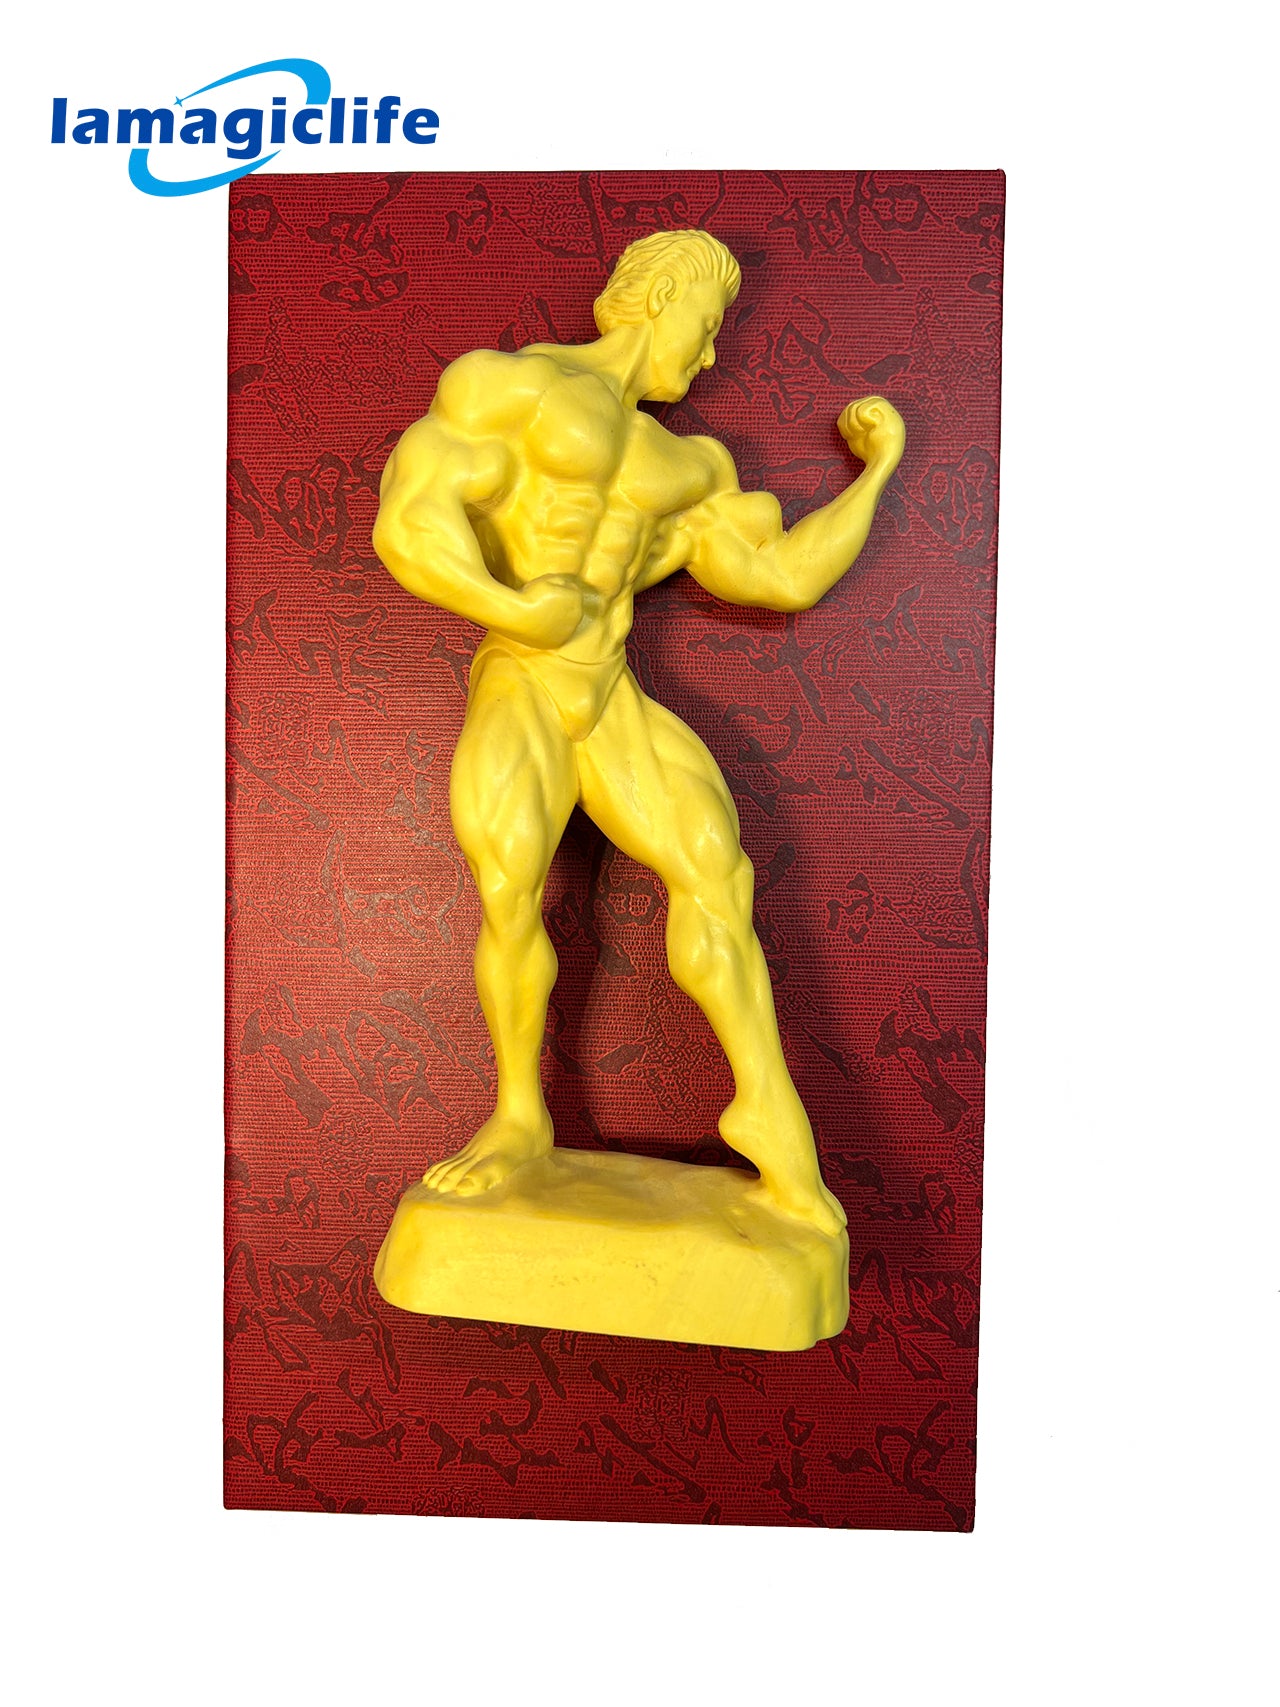 Lamagiclife Artisan Crafted Muscular Gentleman Sculpture in Pure Handcrafted Yellow Boxwood